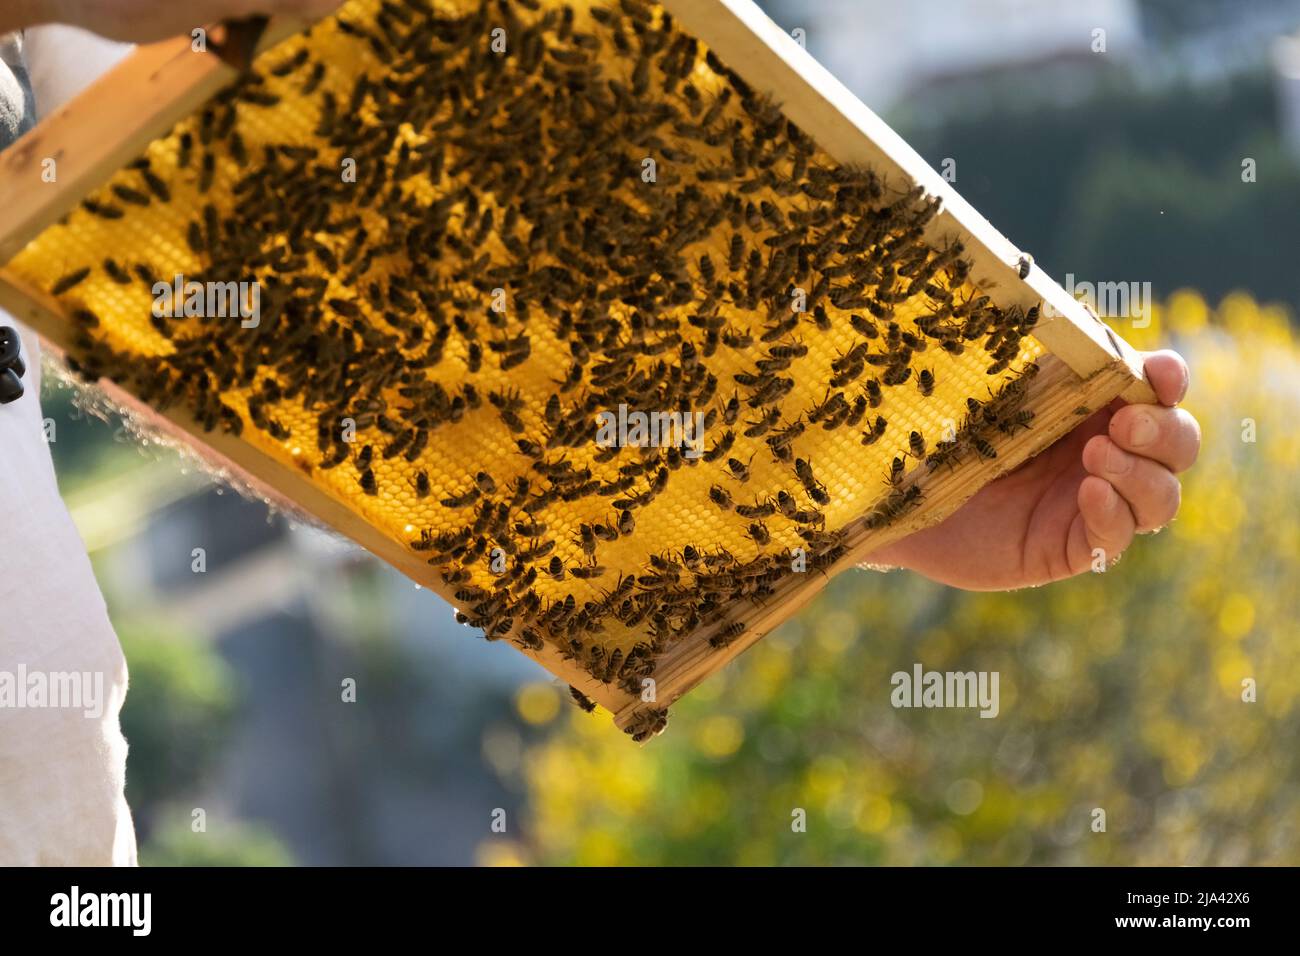 Apiculture, working with the bees, agricultural activities Stock Photo